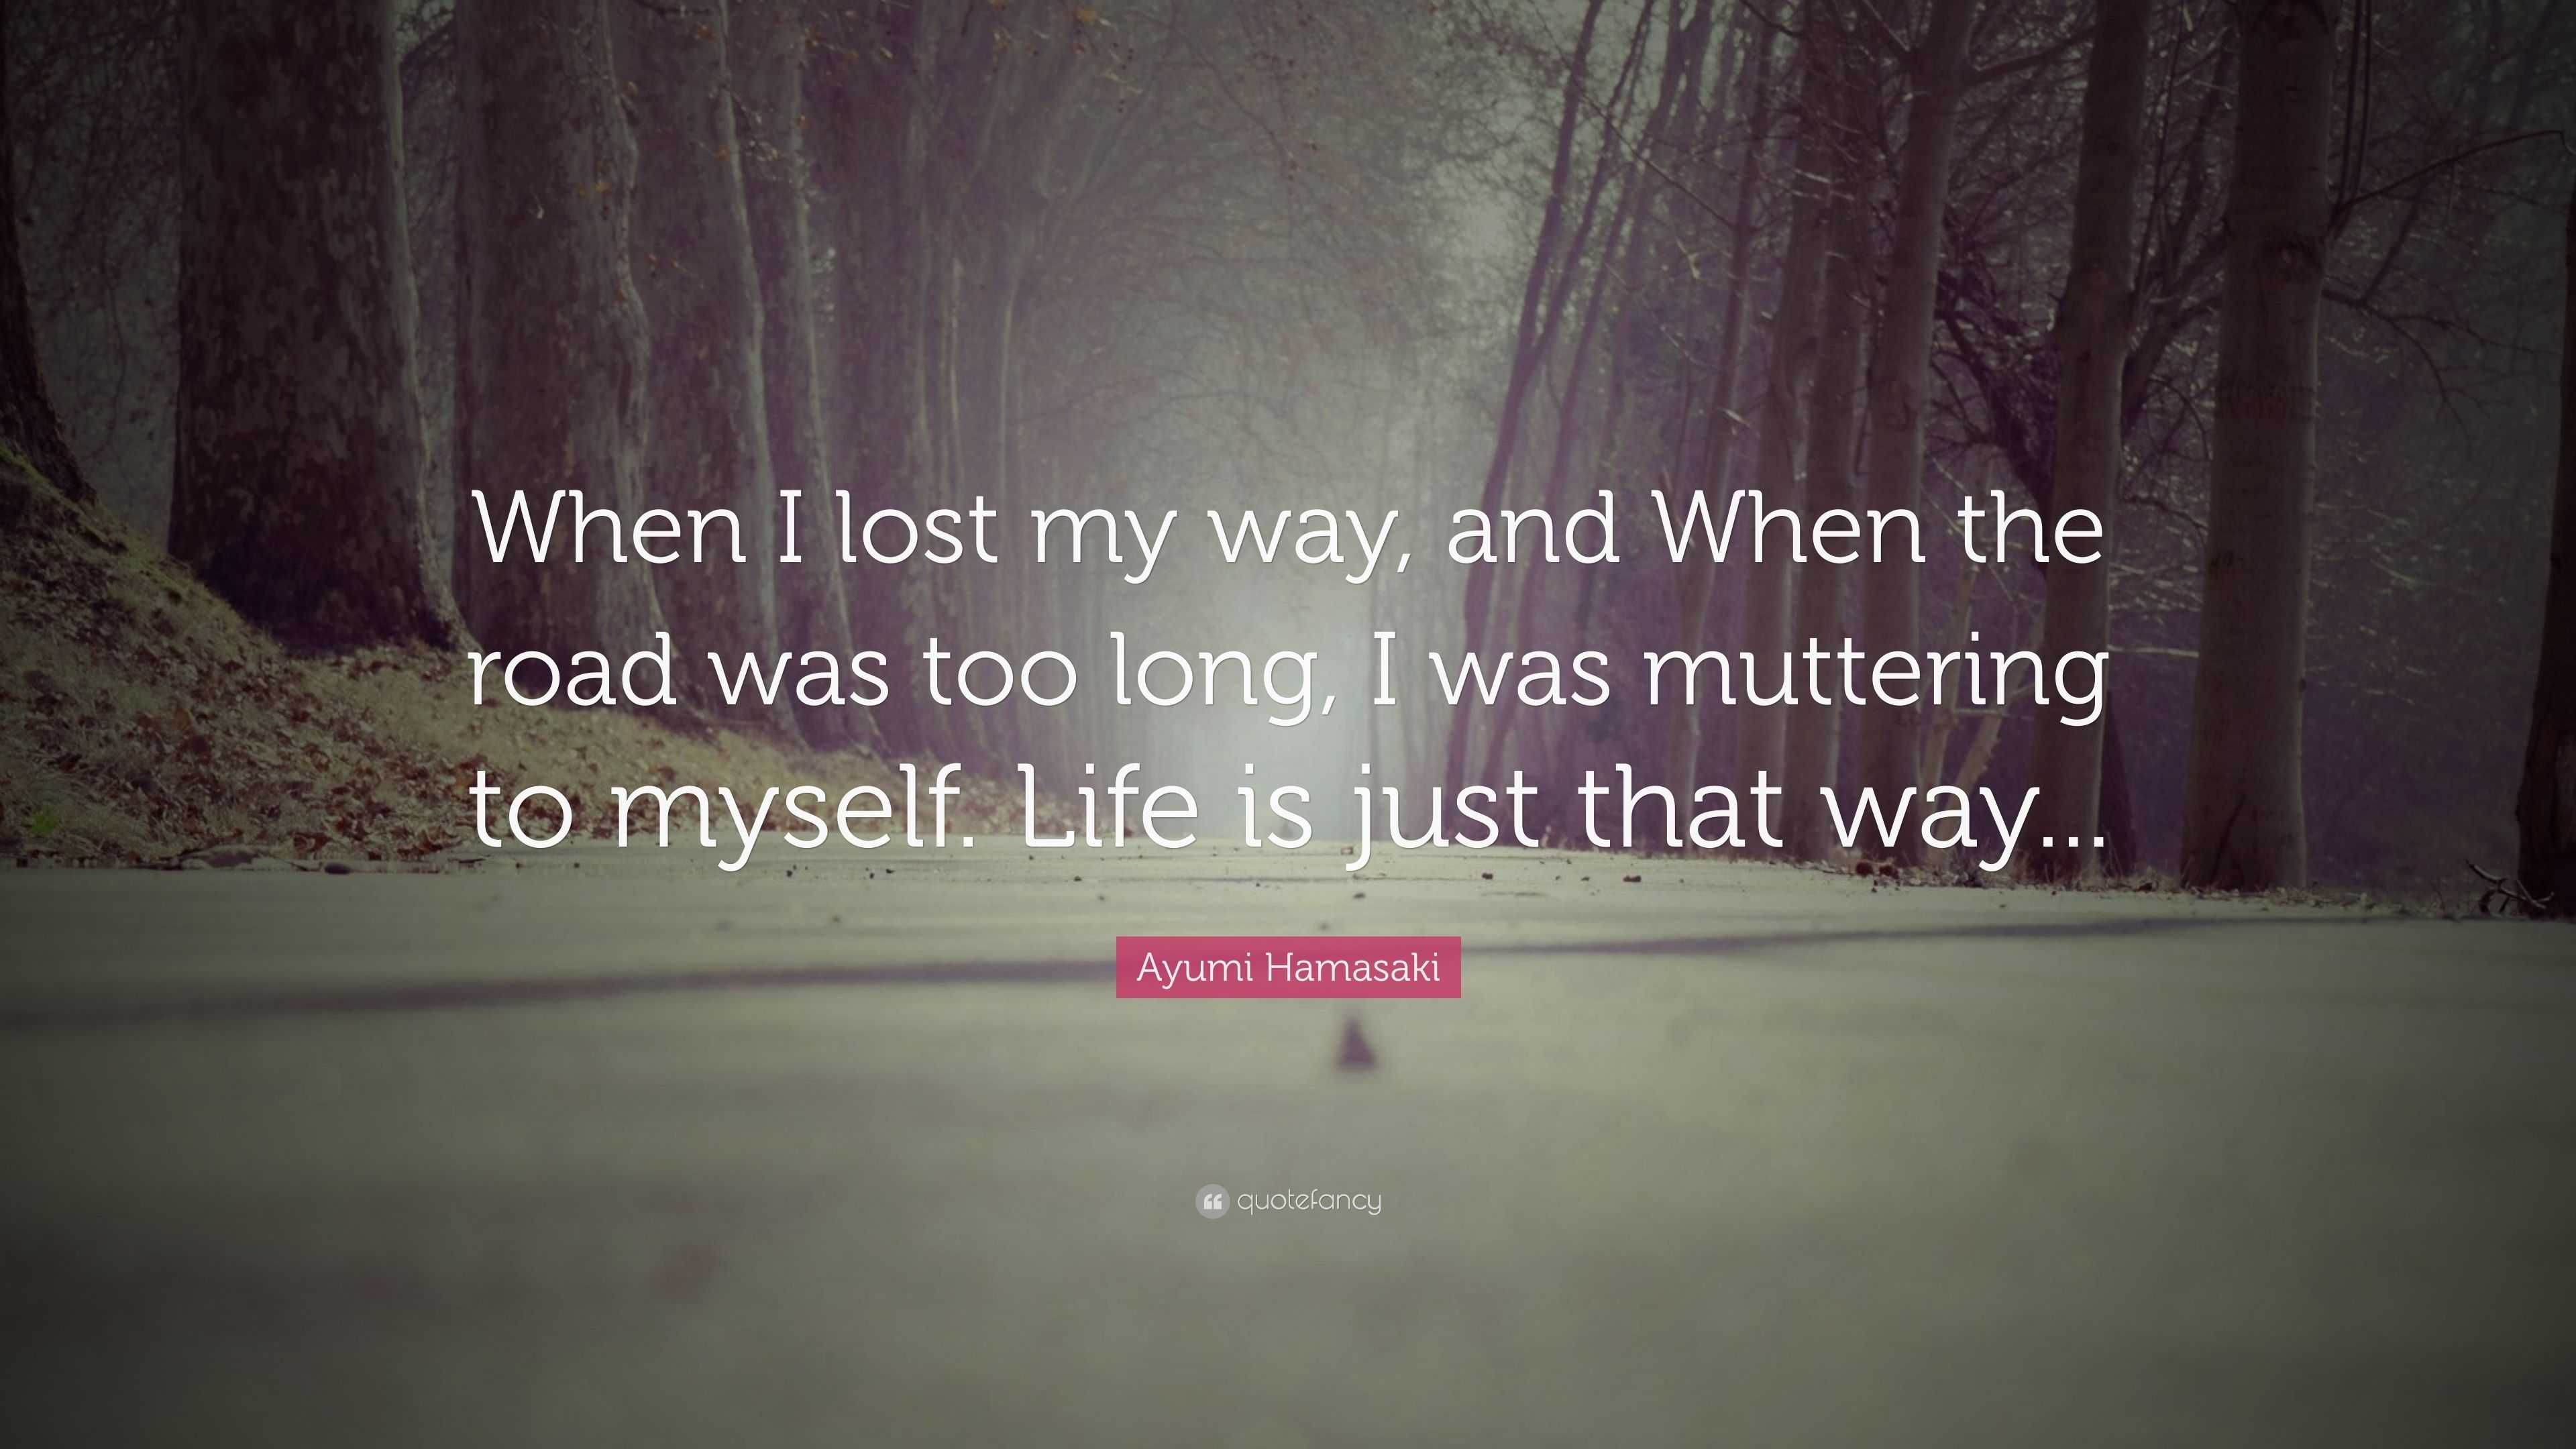 Ayumi Hamasaki Quote: “When I lost my way, and When the road was too ...